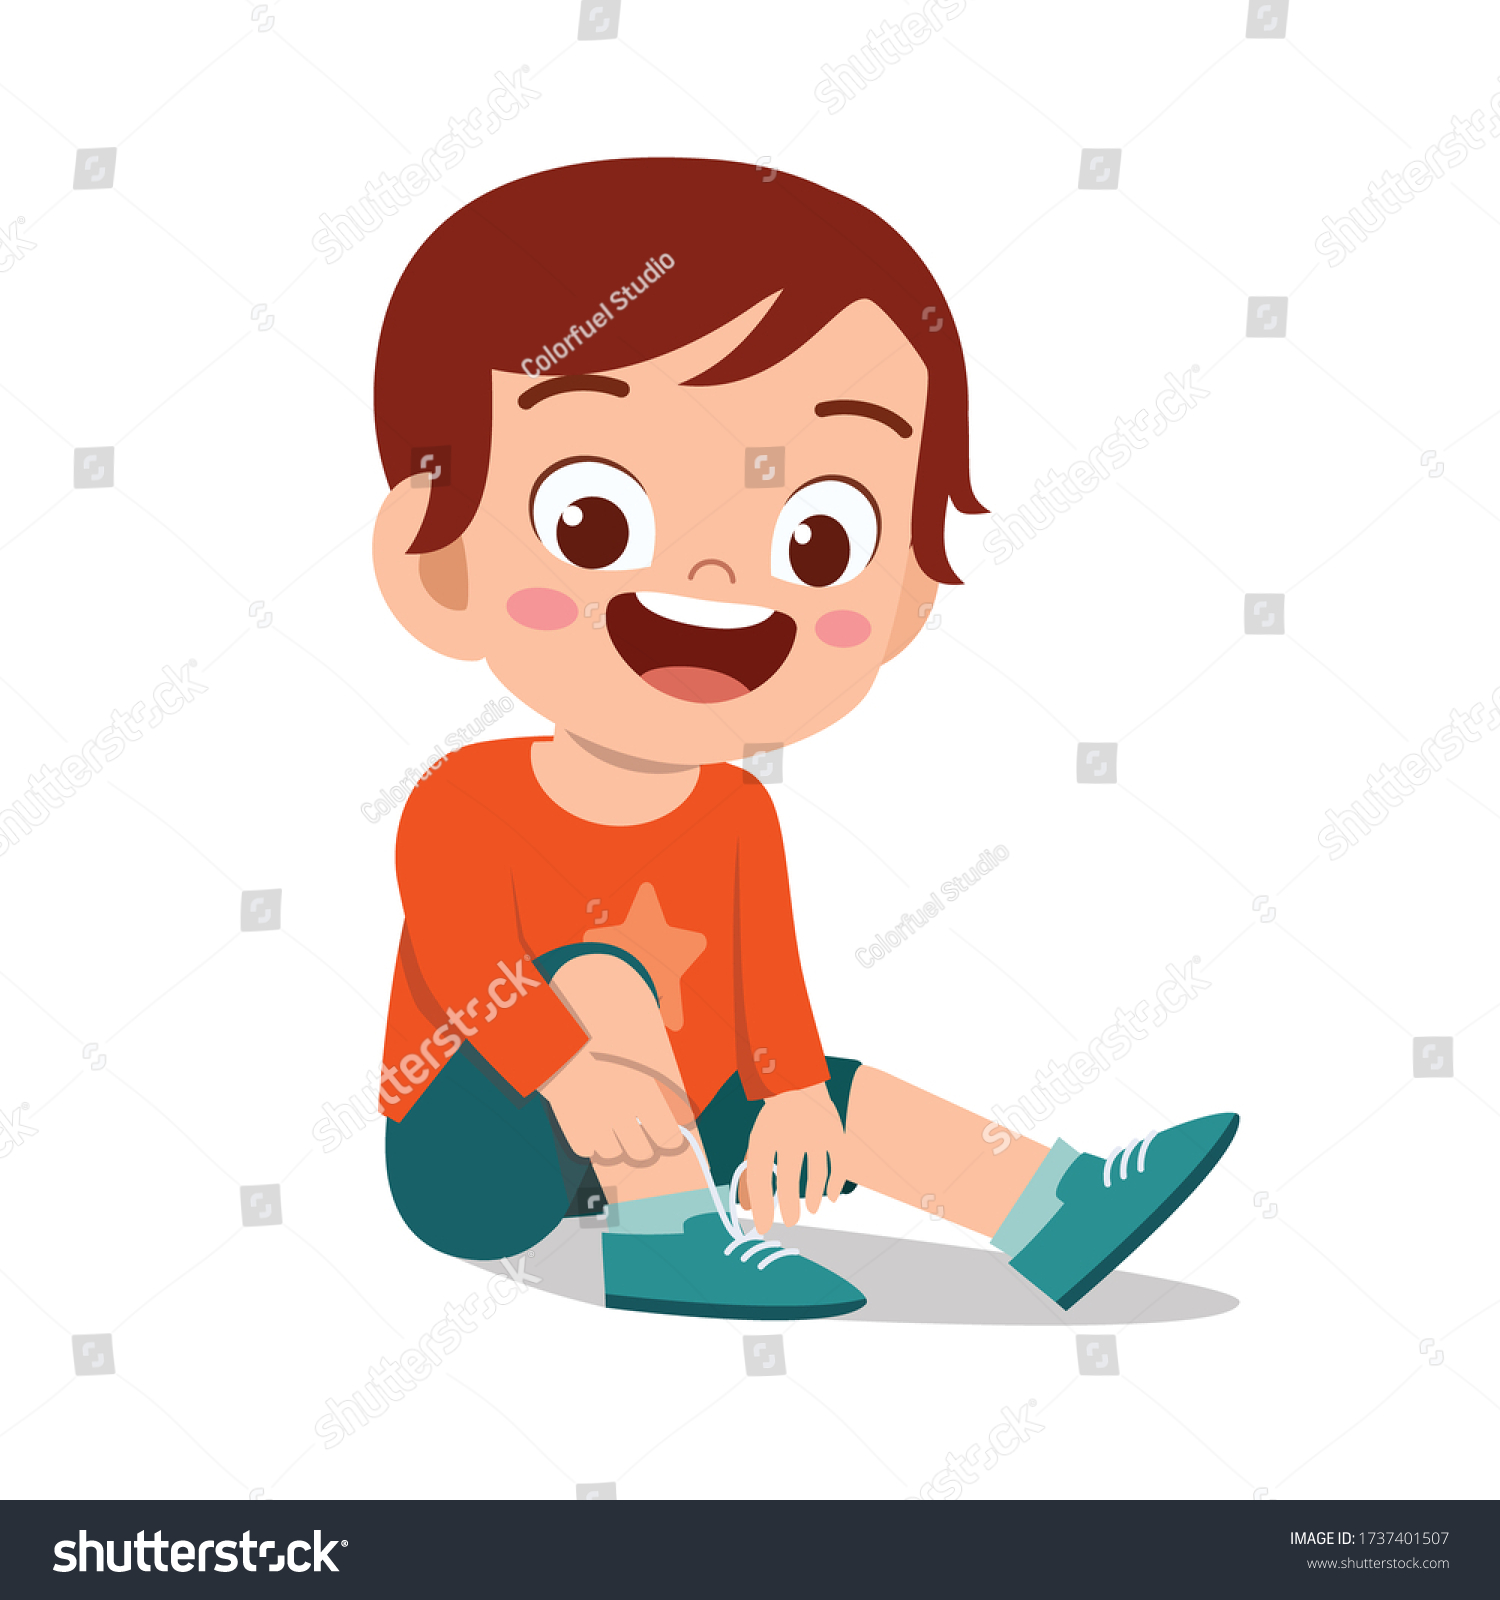 1,270 Boy tying shoes Stock Illustrations, Images & Vectors | Shutterstock